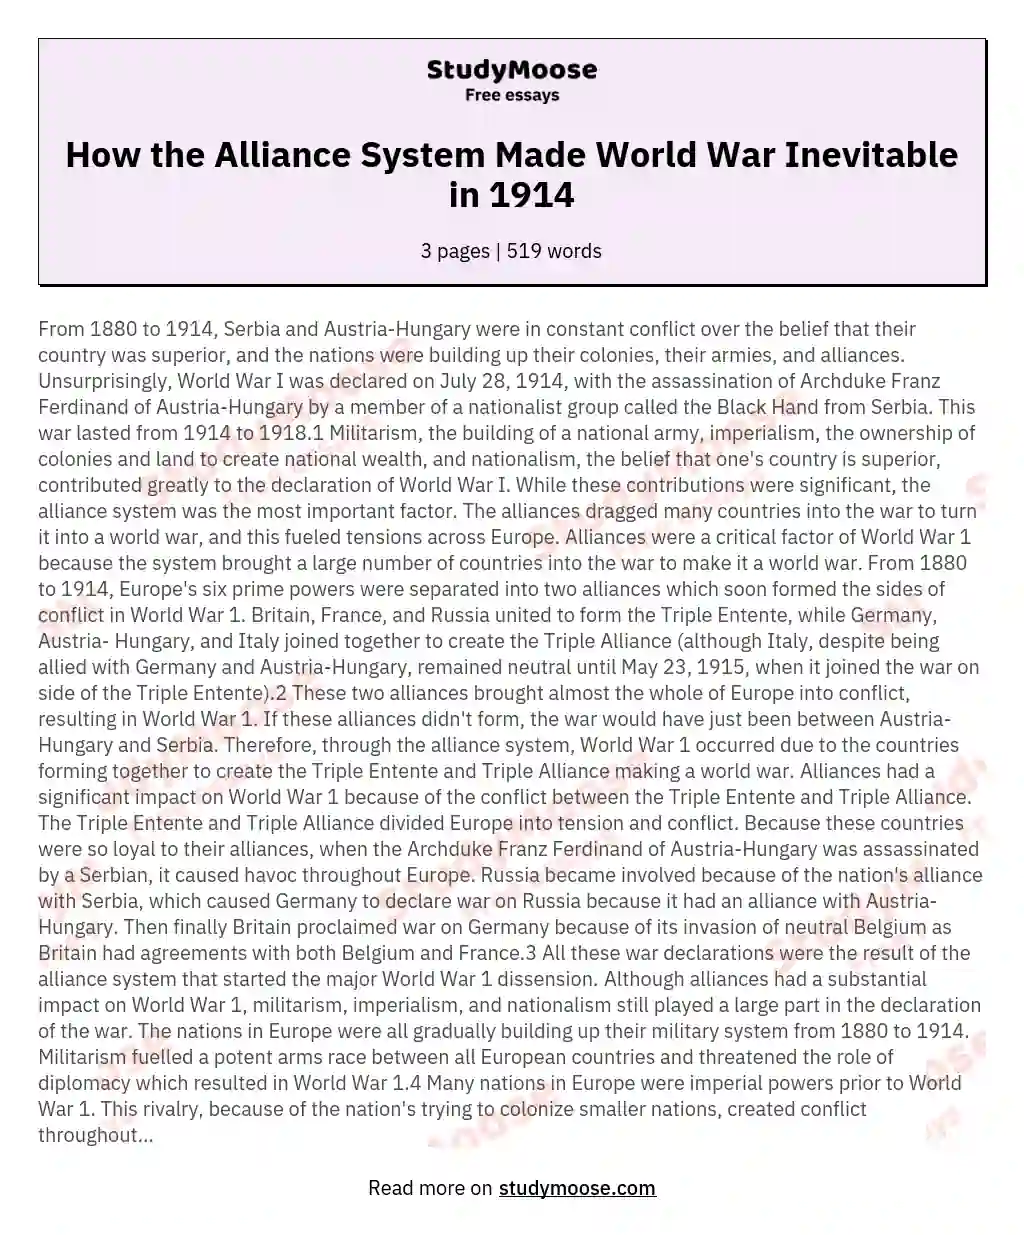 How the Alliance System Made World War Inevitable in 1914 essay